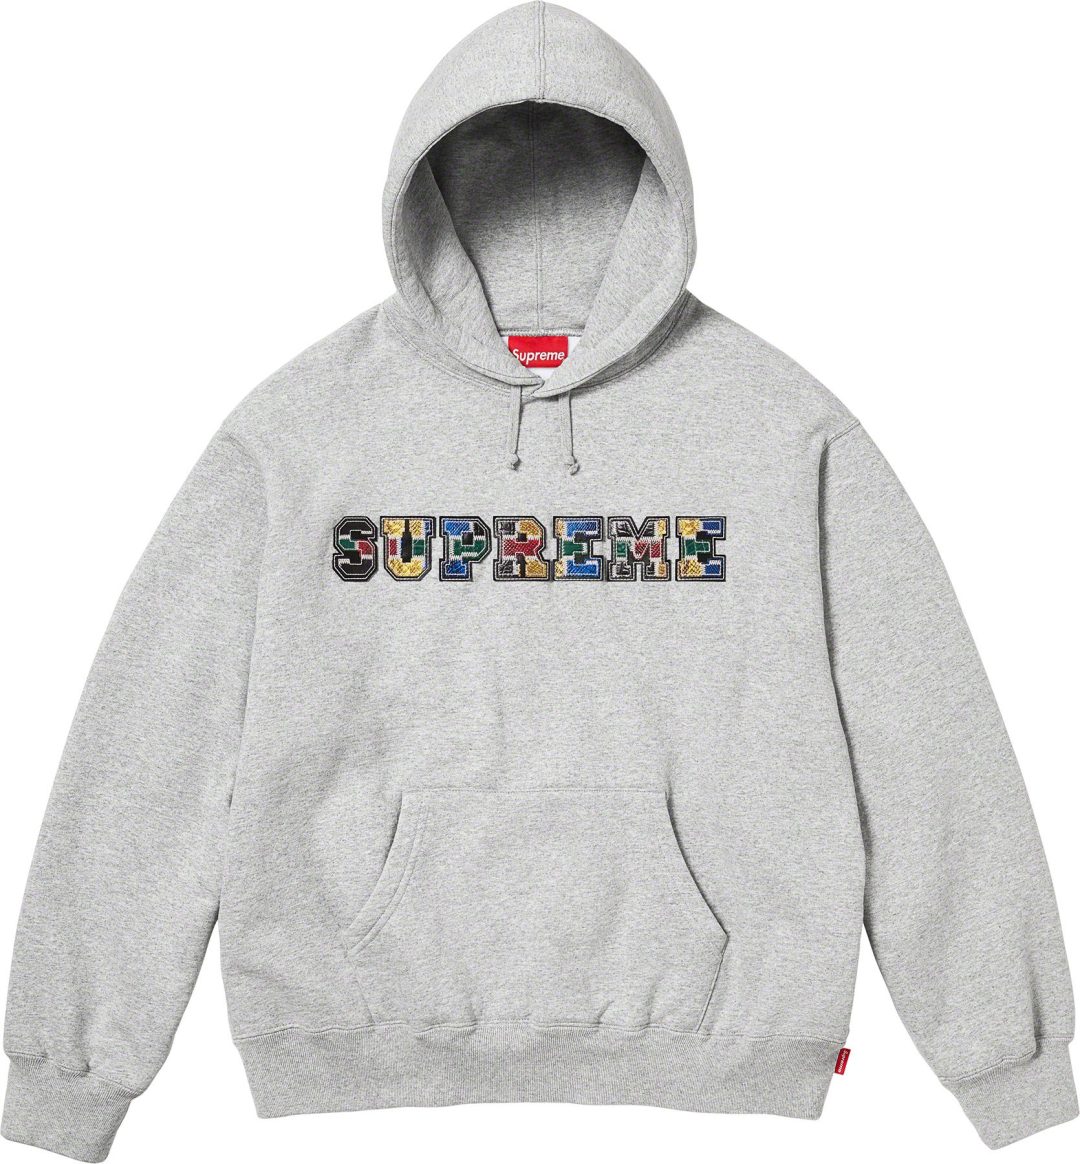 supreme-23fw-23aw-collegiate-patchwork-leather-hooded-sweatshirt